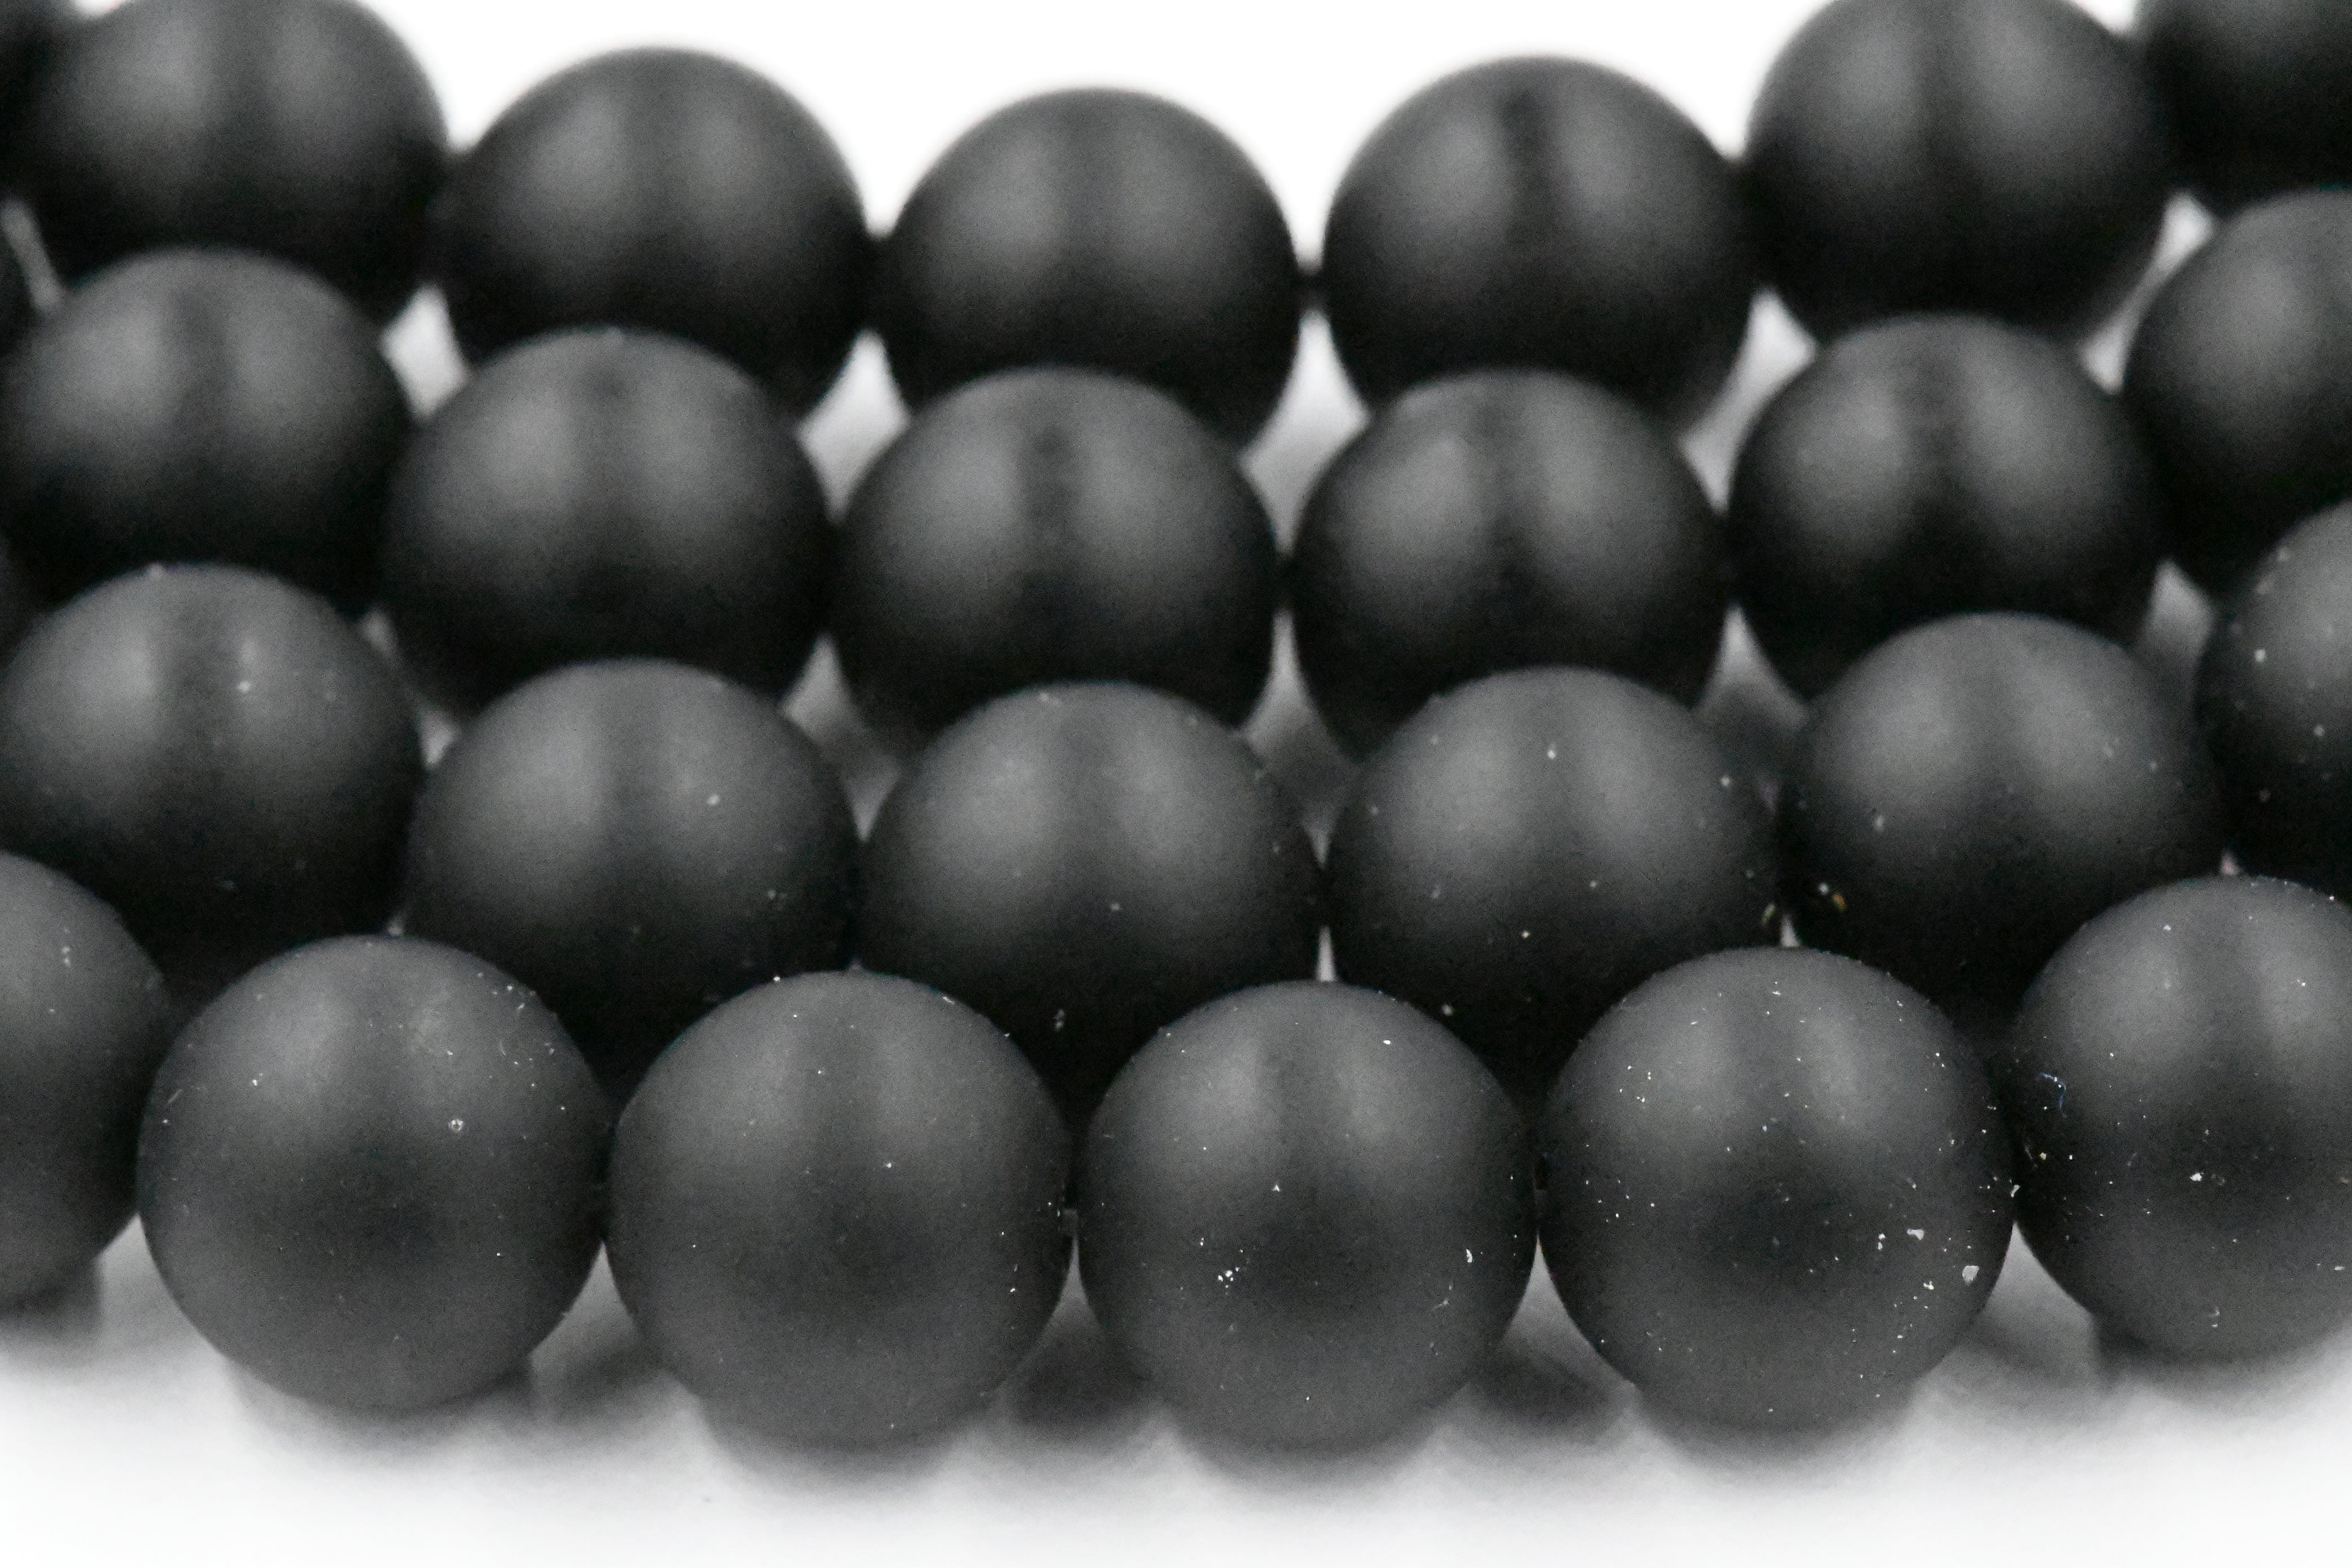 Matte Black Onyx, 3mm, 4mm, 6mm, 8mm, 10mm, 12mm Frosted Black Onyx Round Beads in Opaque Finish -15.5 inch strand